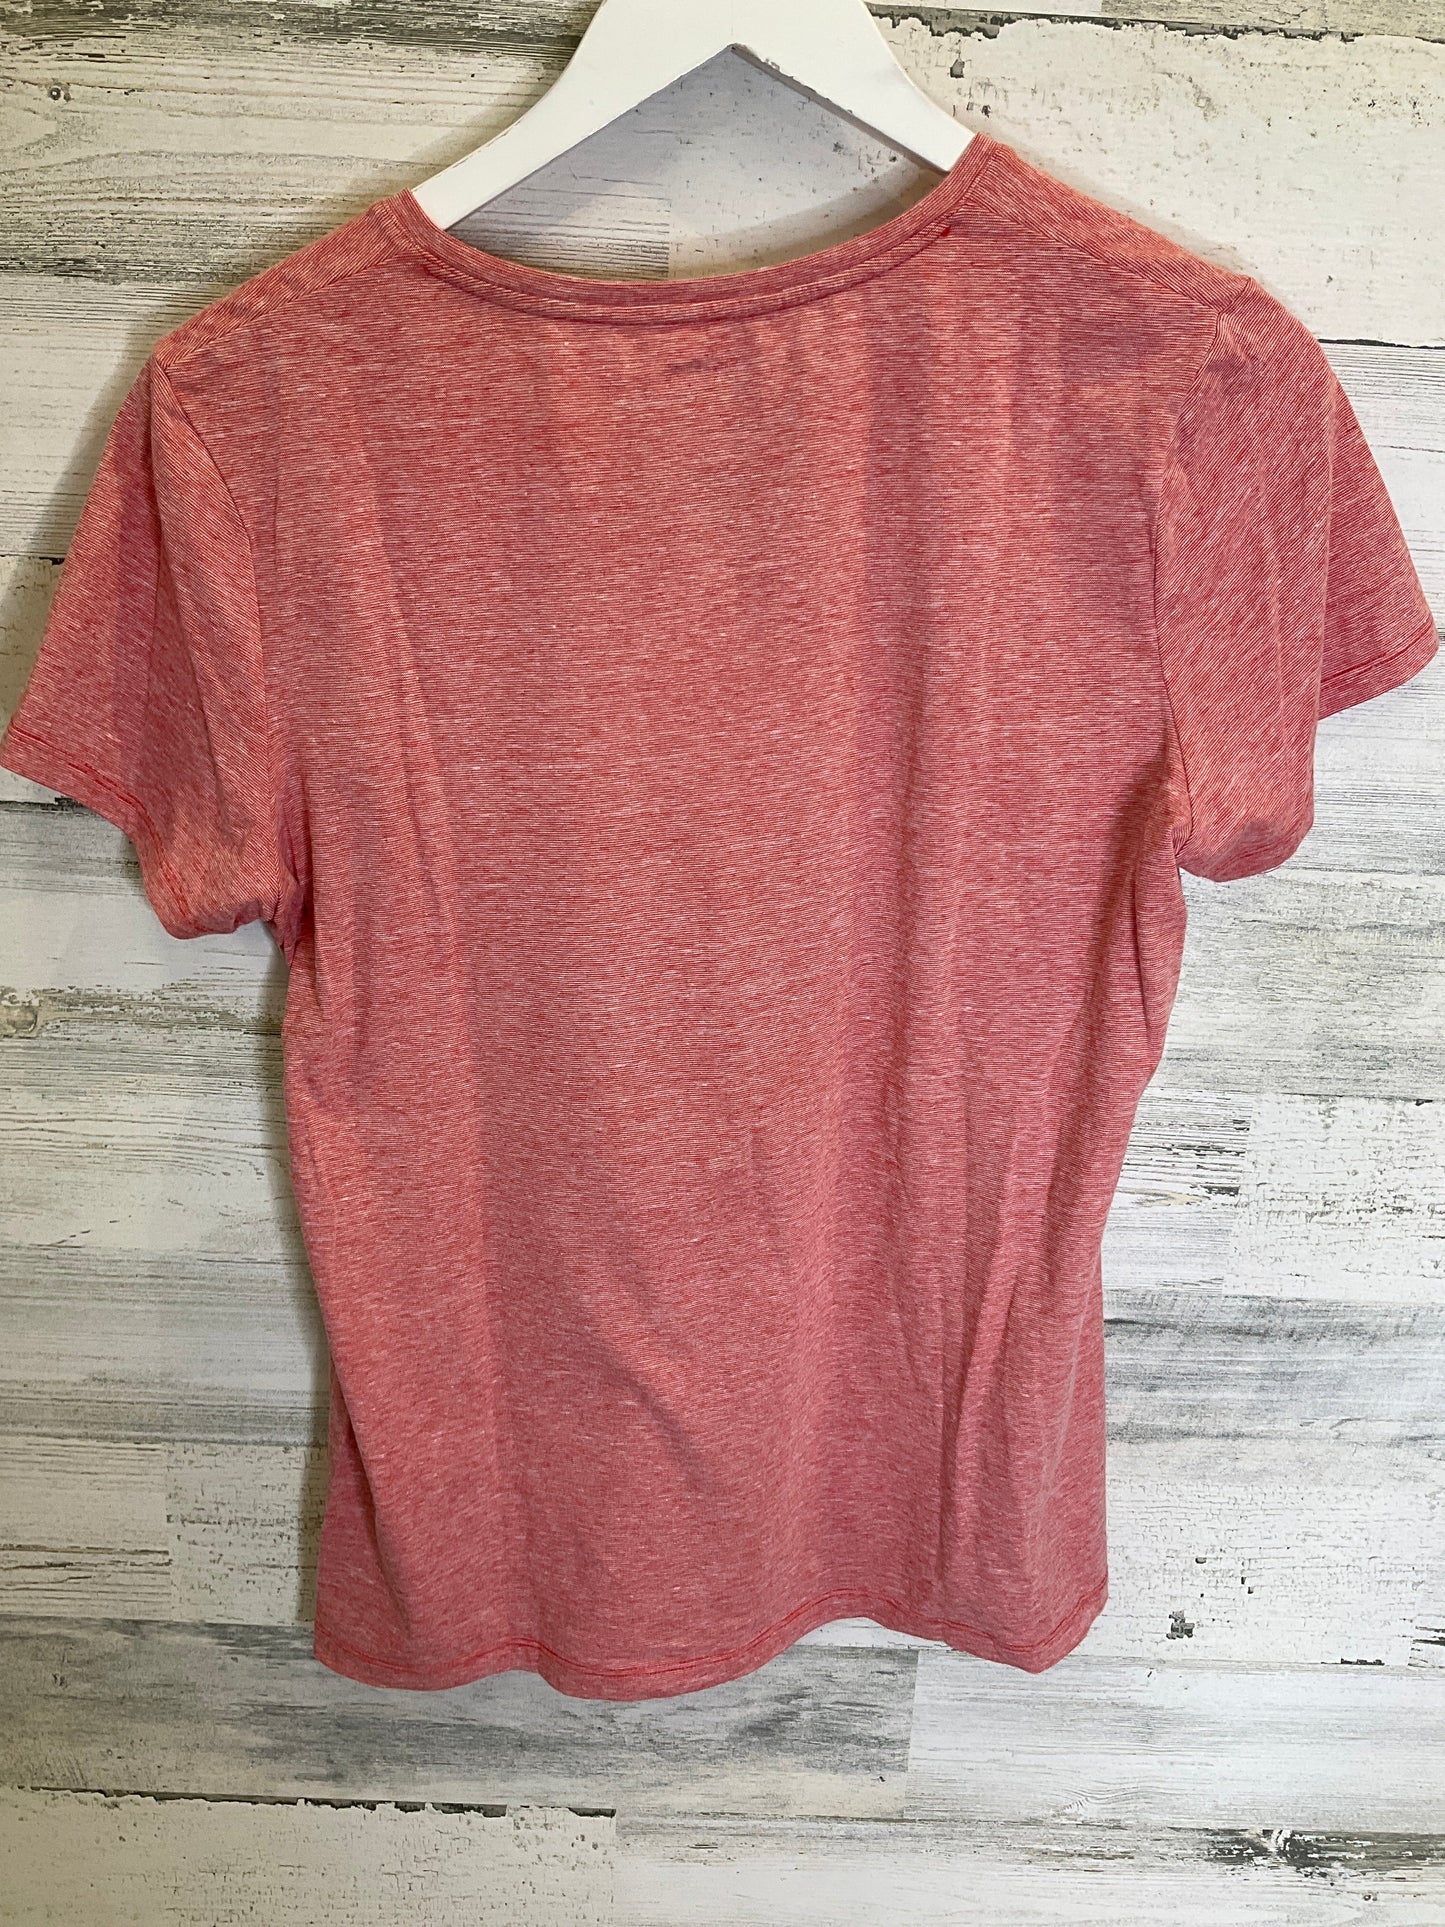 Red Top Short Sleeve Croft And Barrow, Size M